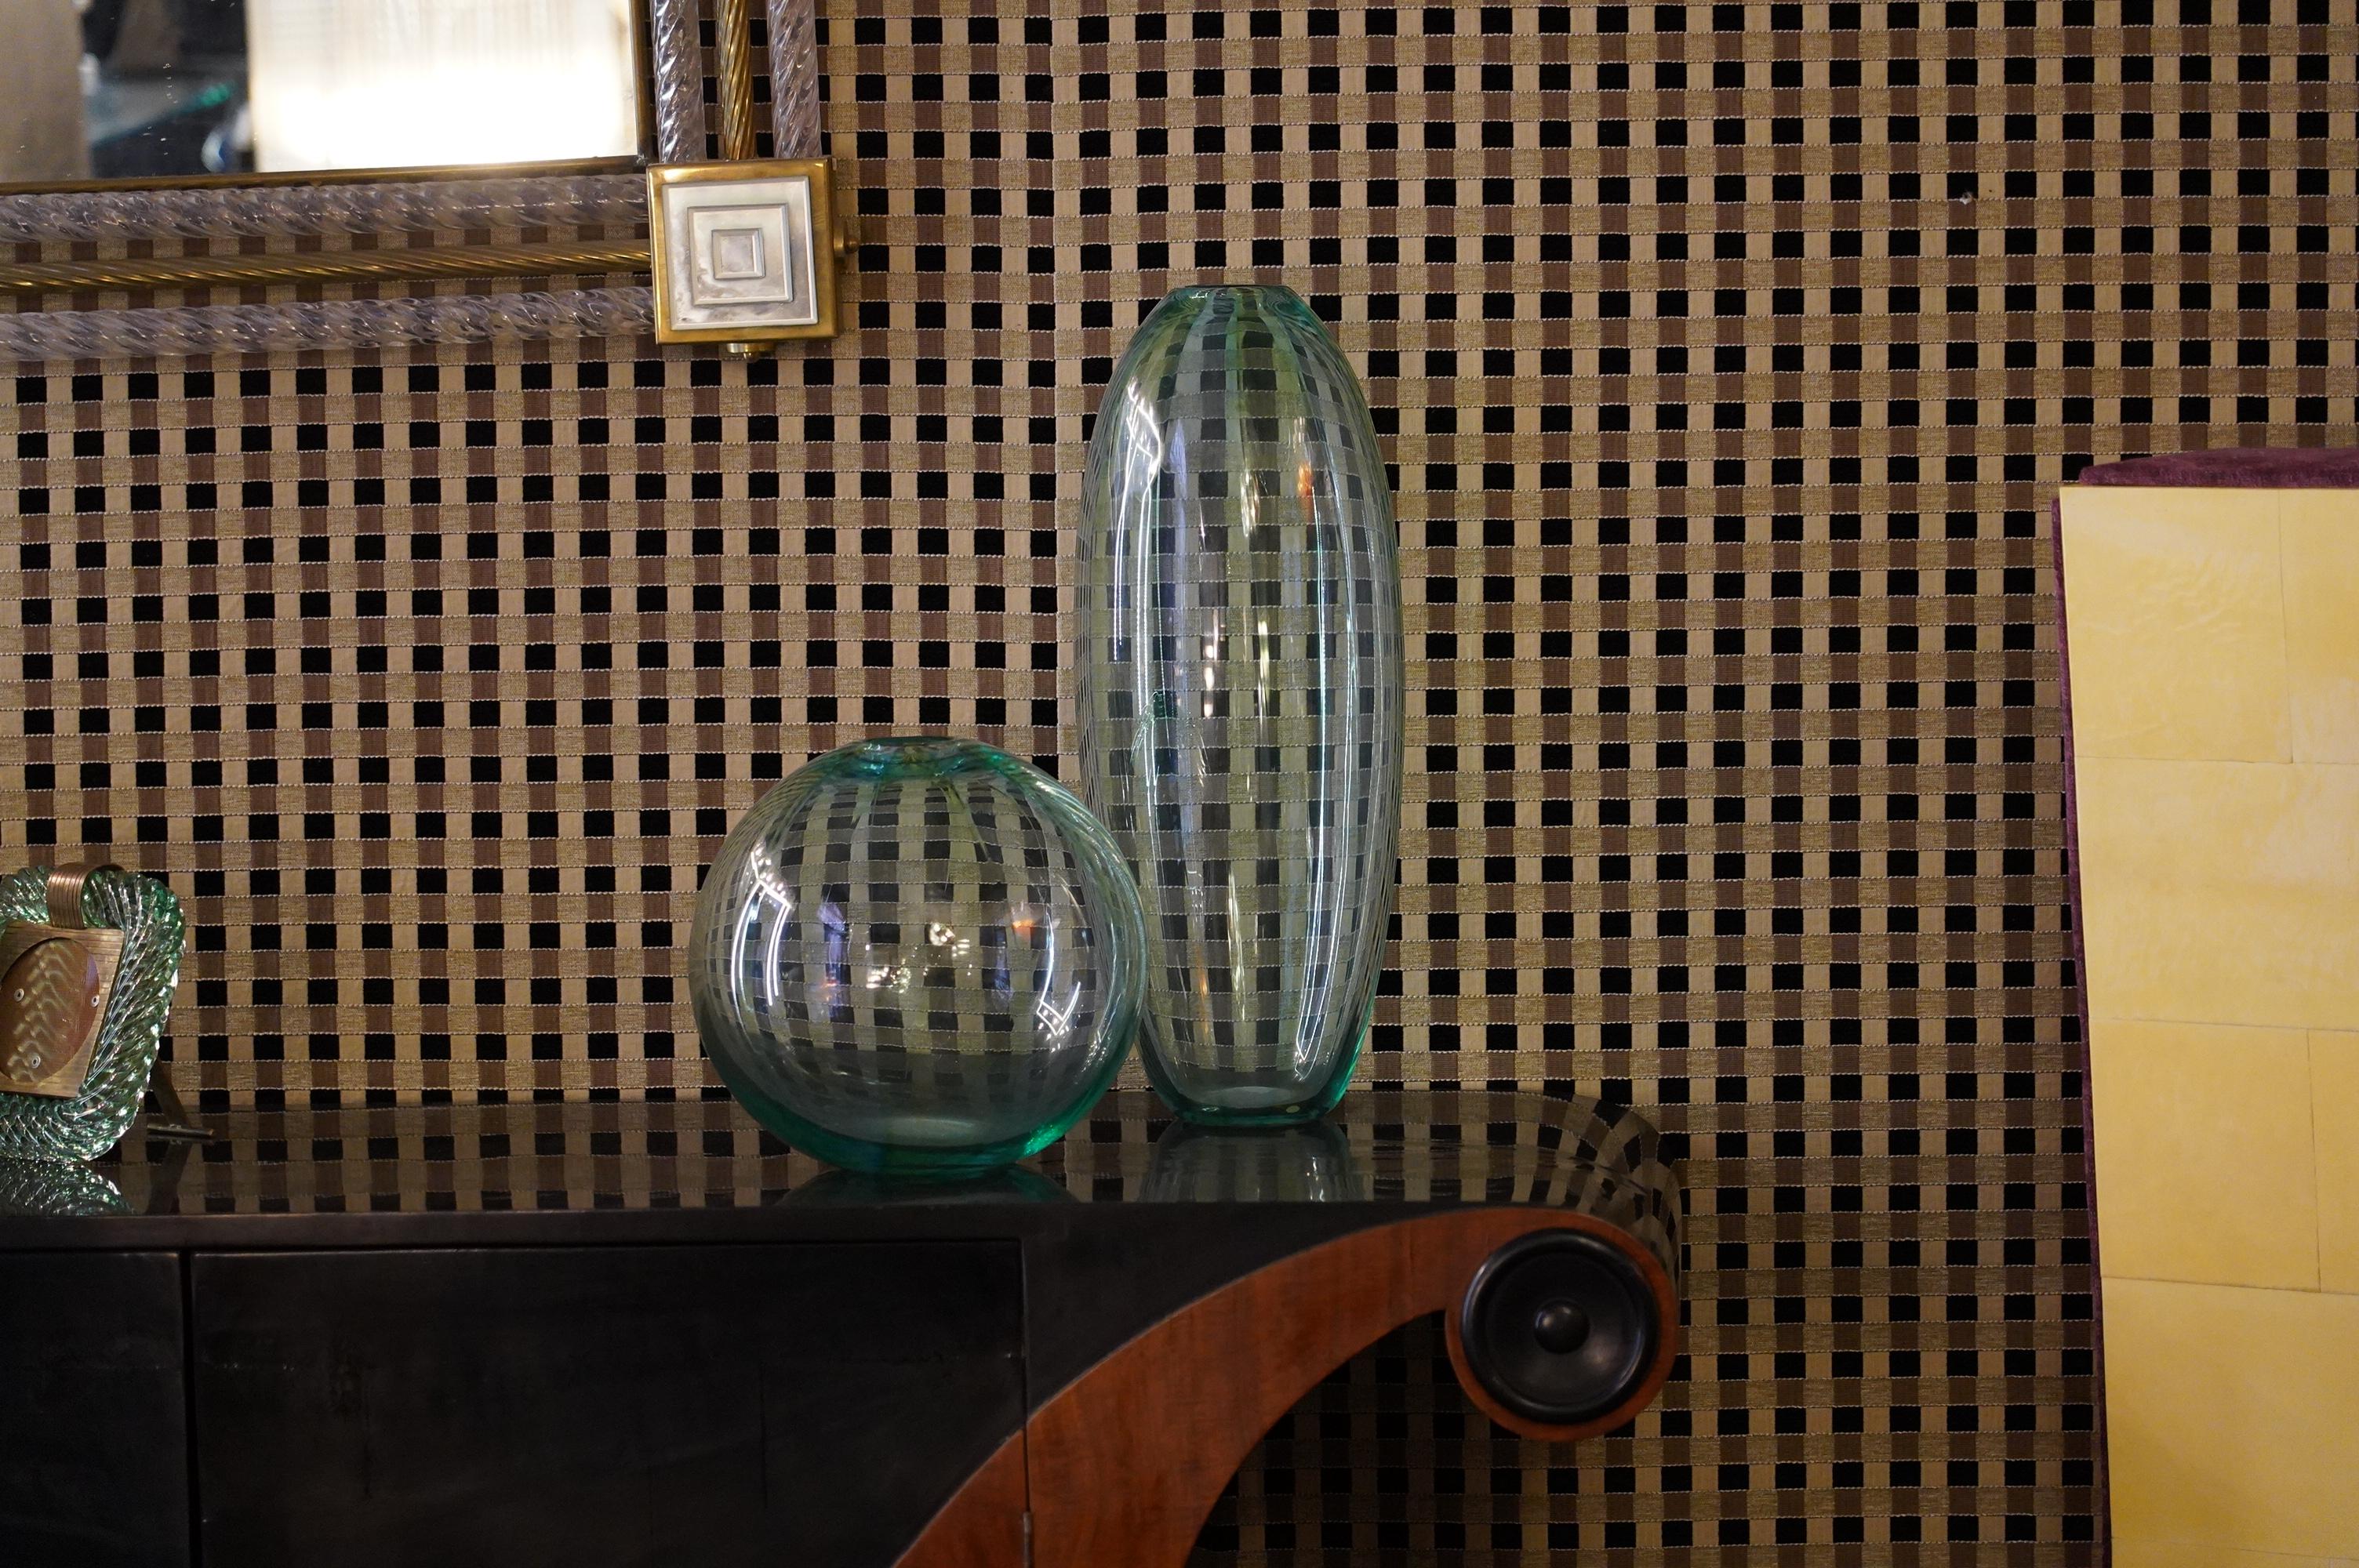 Formia luxury glass are punched, this pairs of Murano vases.

Pair of Murano vases of different shapes, but combined with one another. One of narrow and long shape, while the other is spherical. Their color is a light green and blue, but